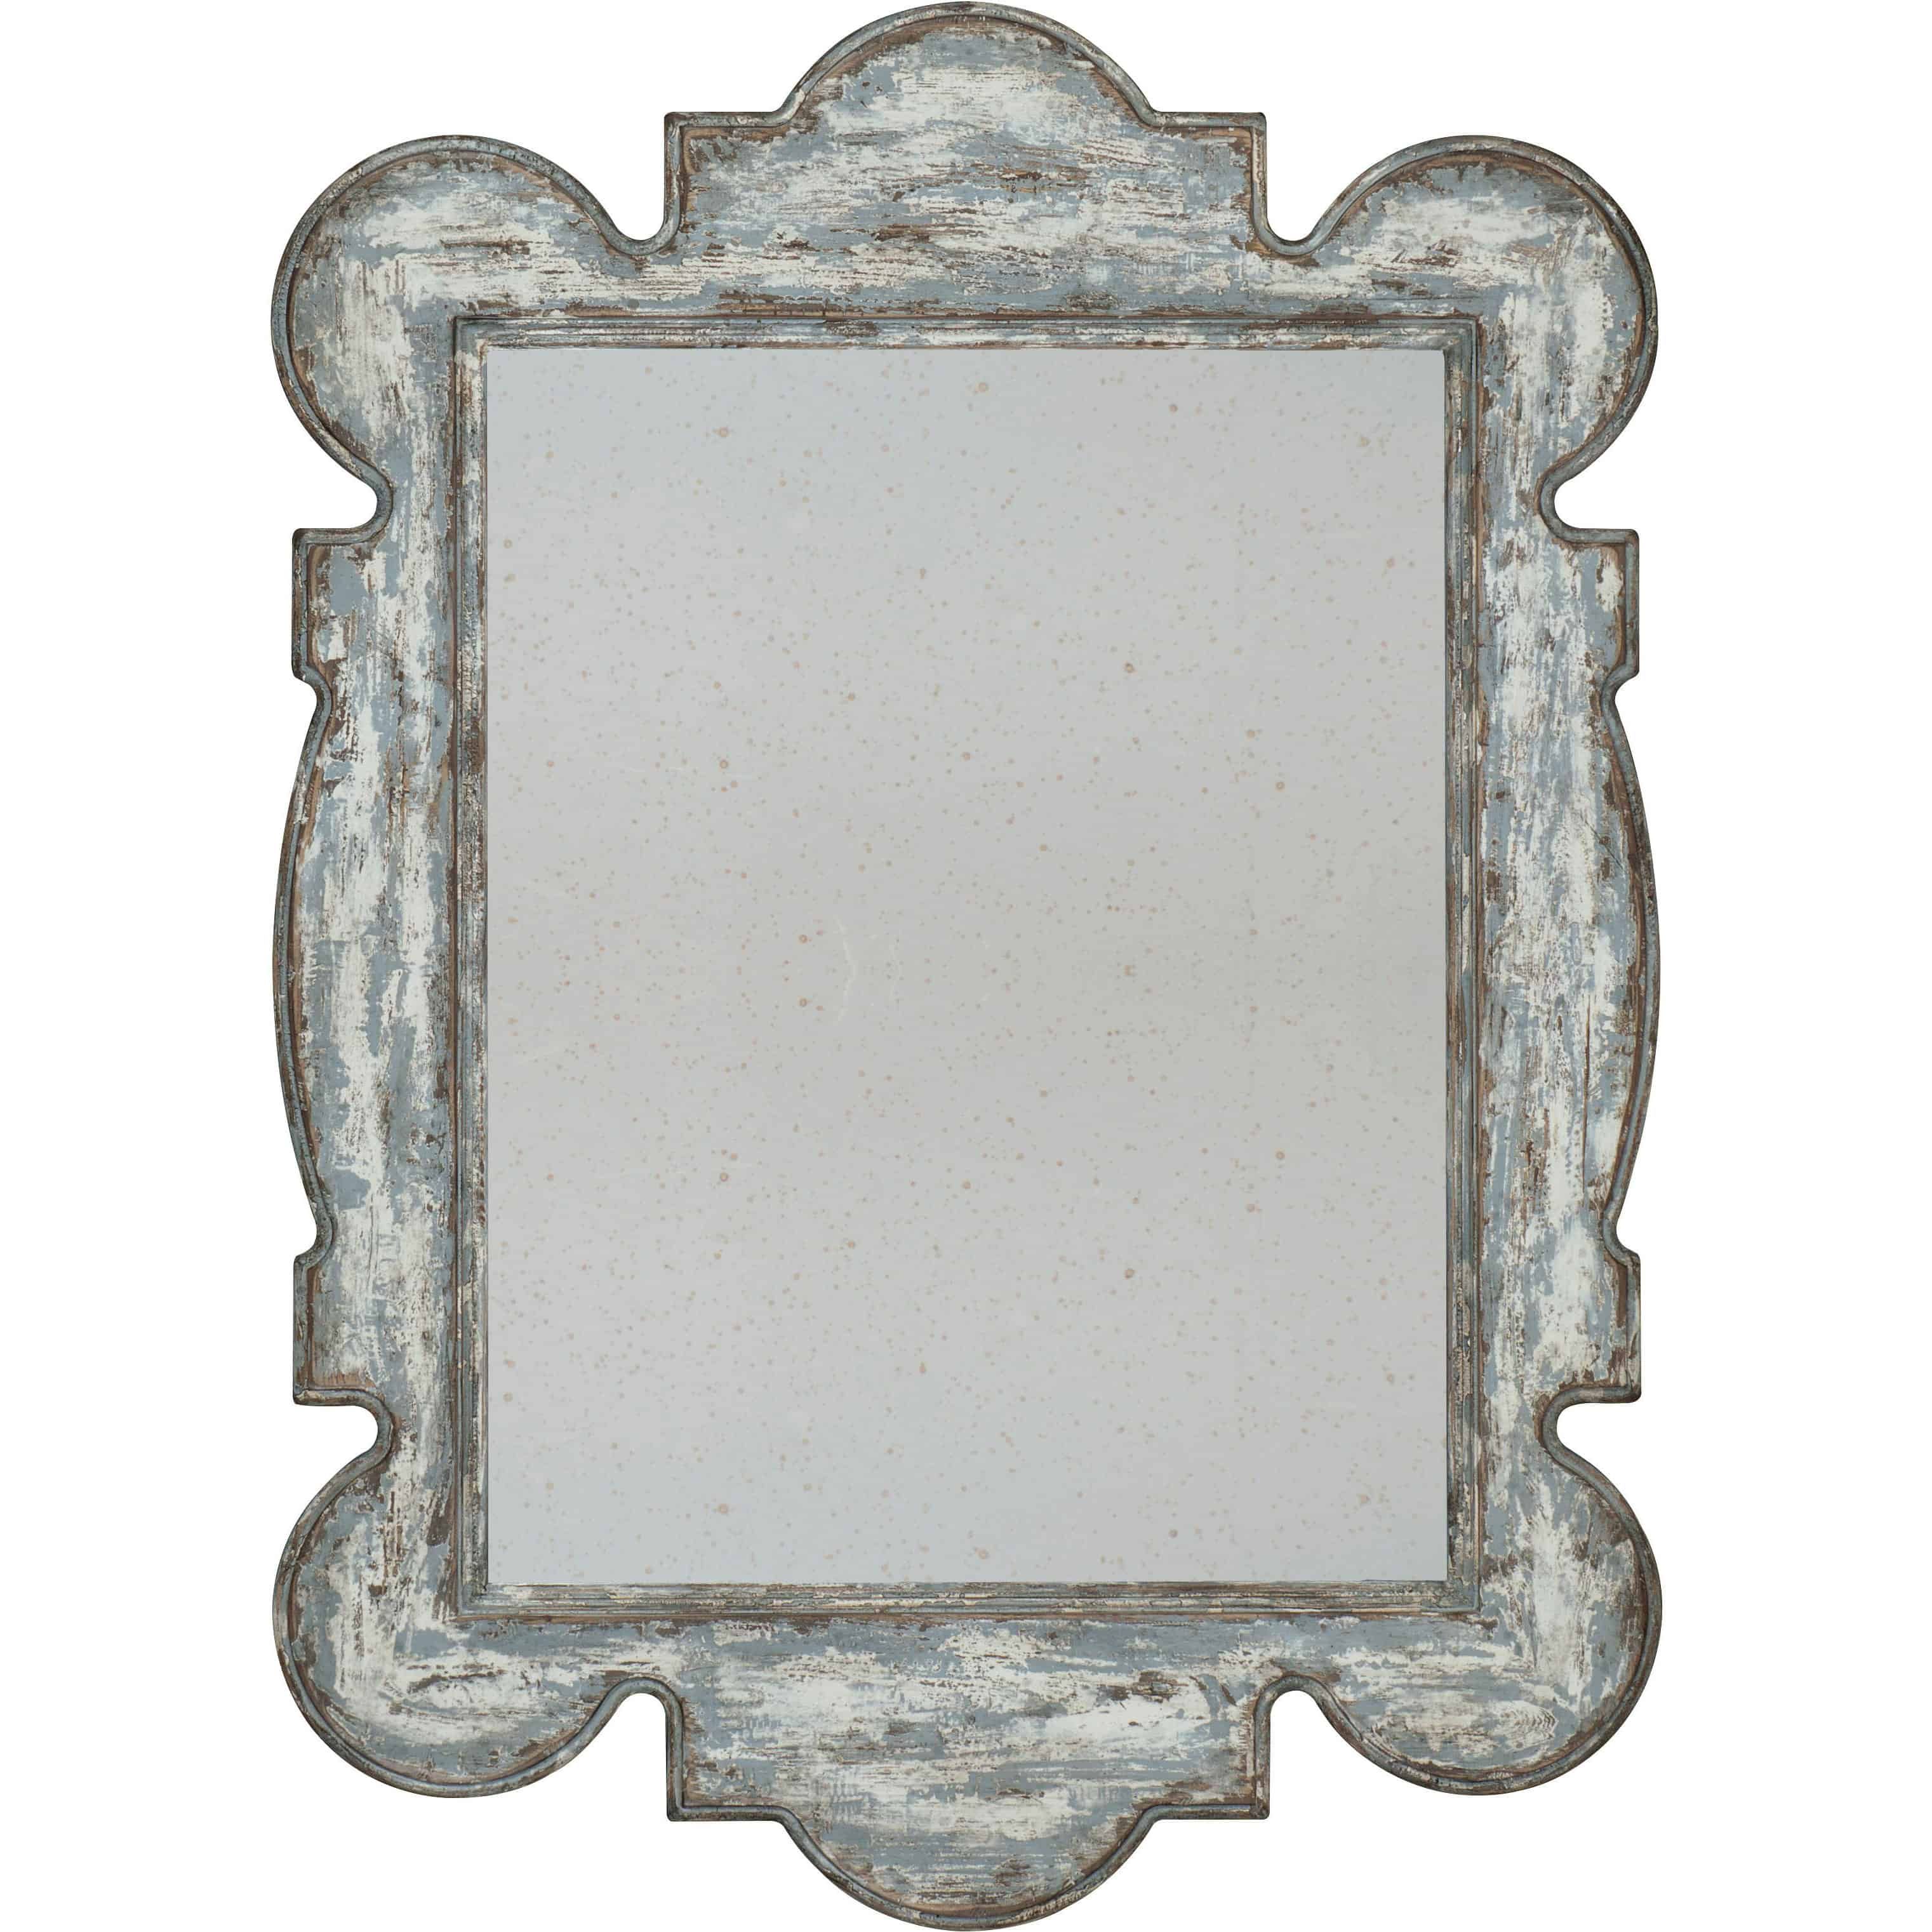 Beaumont Accent Mirror Pertaining To Ogier Accent Mirrors (View 19 of 20)